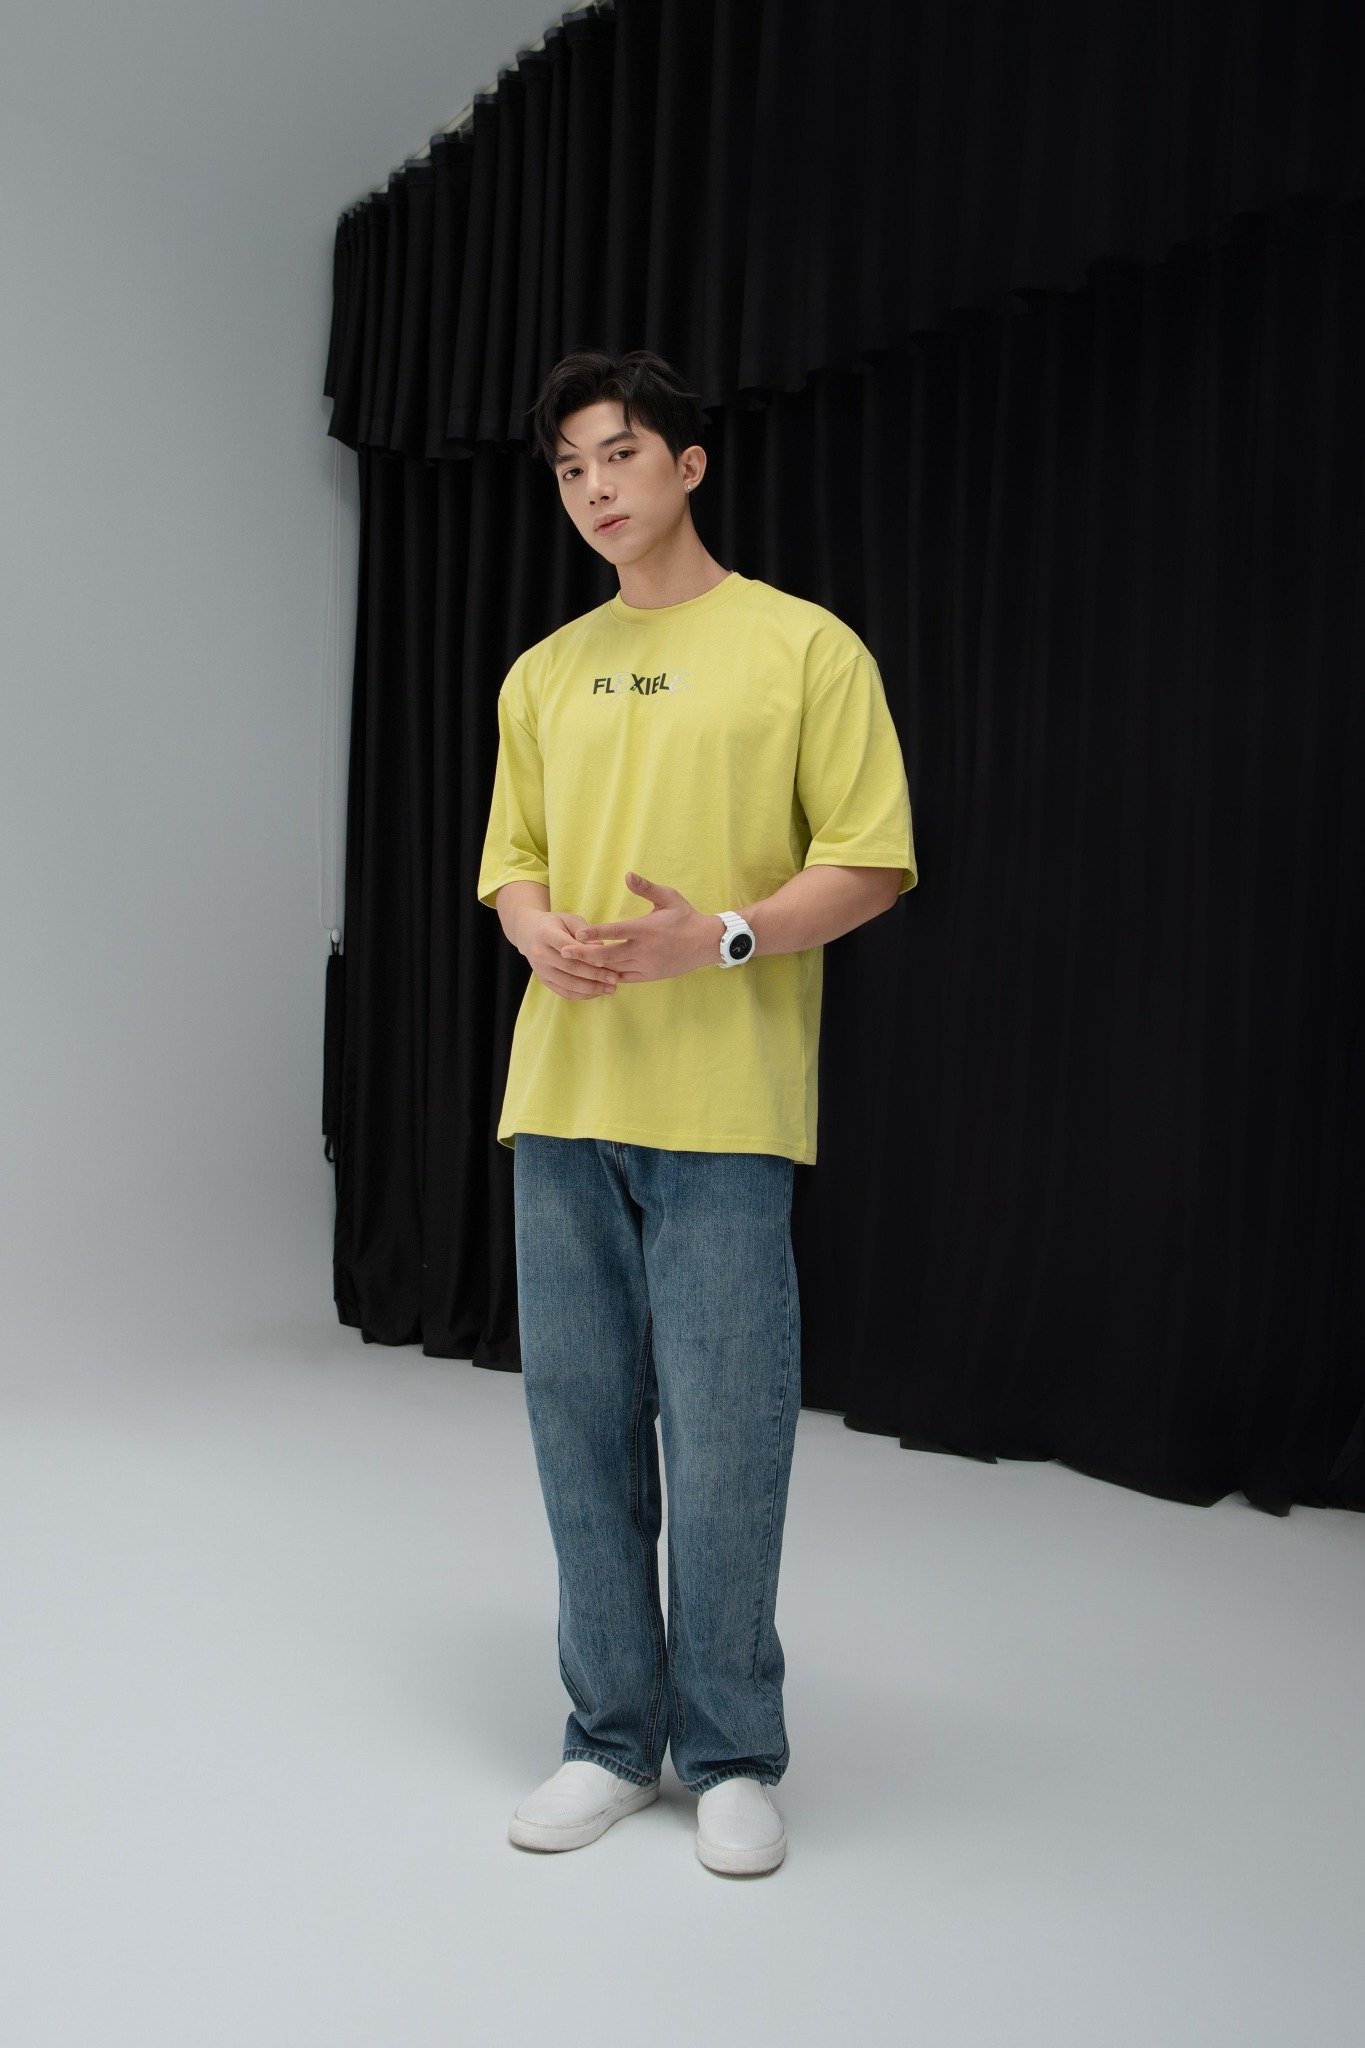 AG91 FACTORY OVERSIZE NEW PRINTED "FLEXIBLE" T-SHIRT - YELLOW